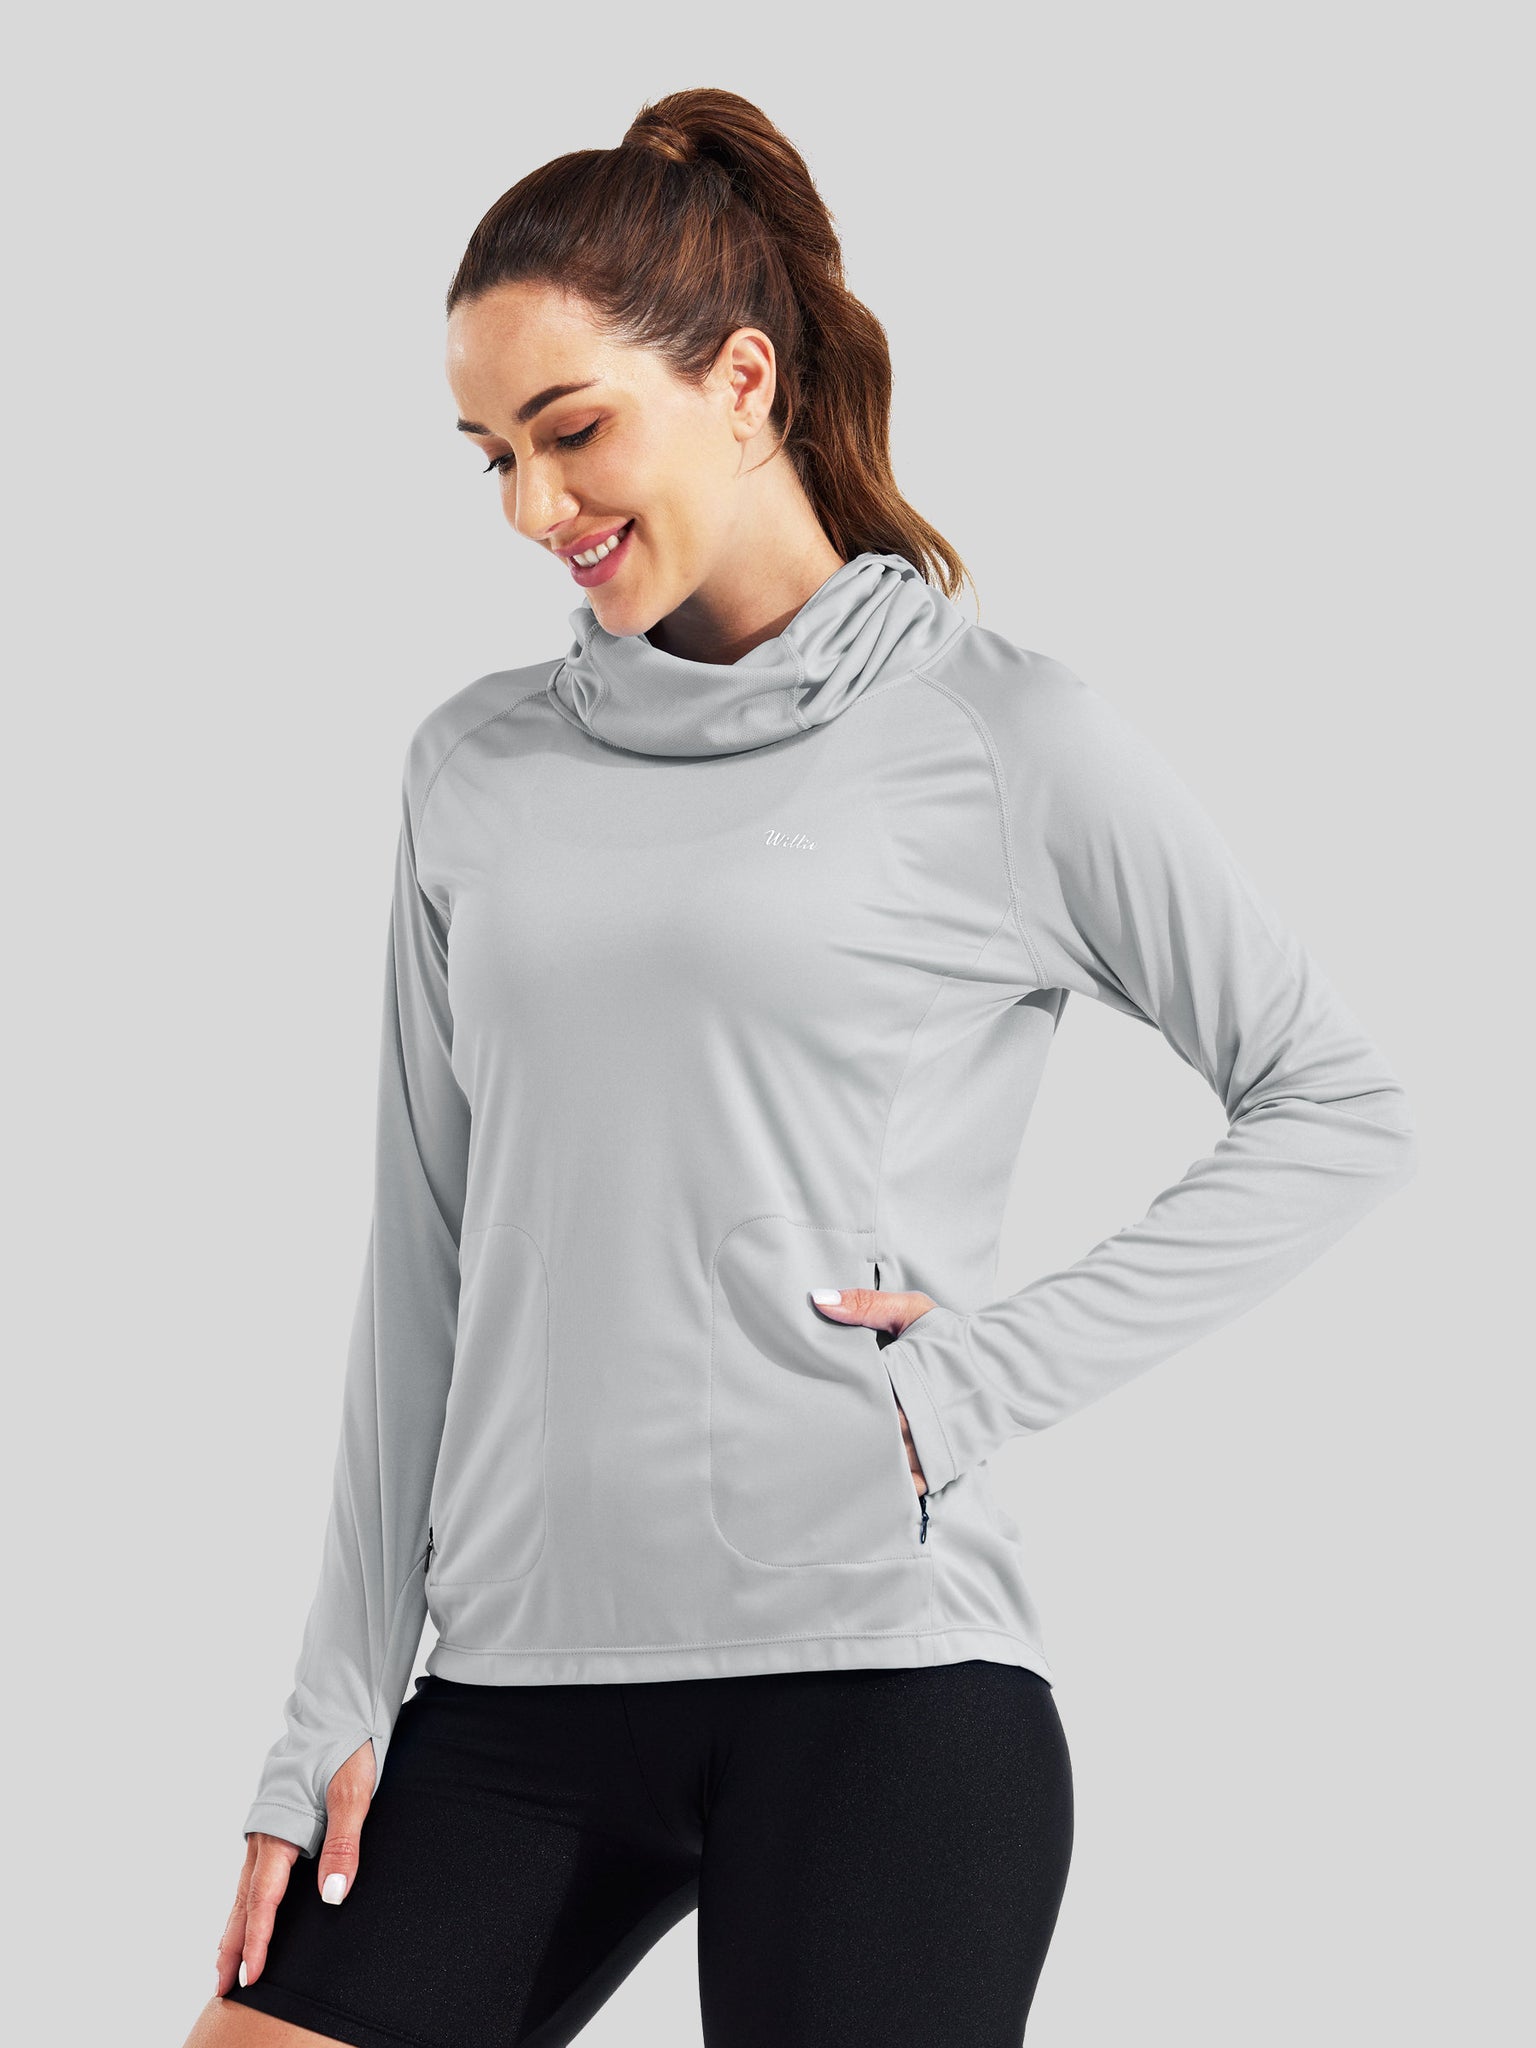 Women's Sun Protection Hoodie Long Sleeve with Face Mask